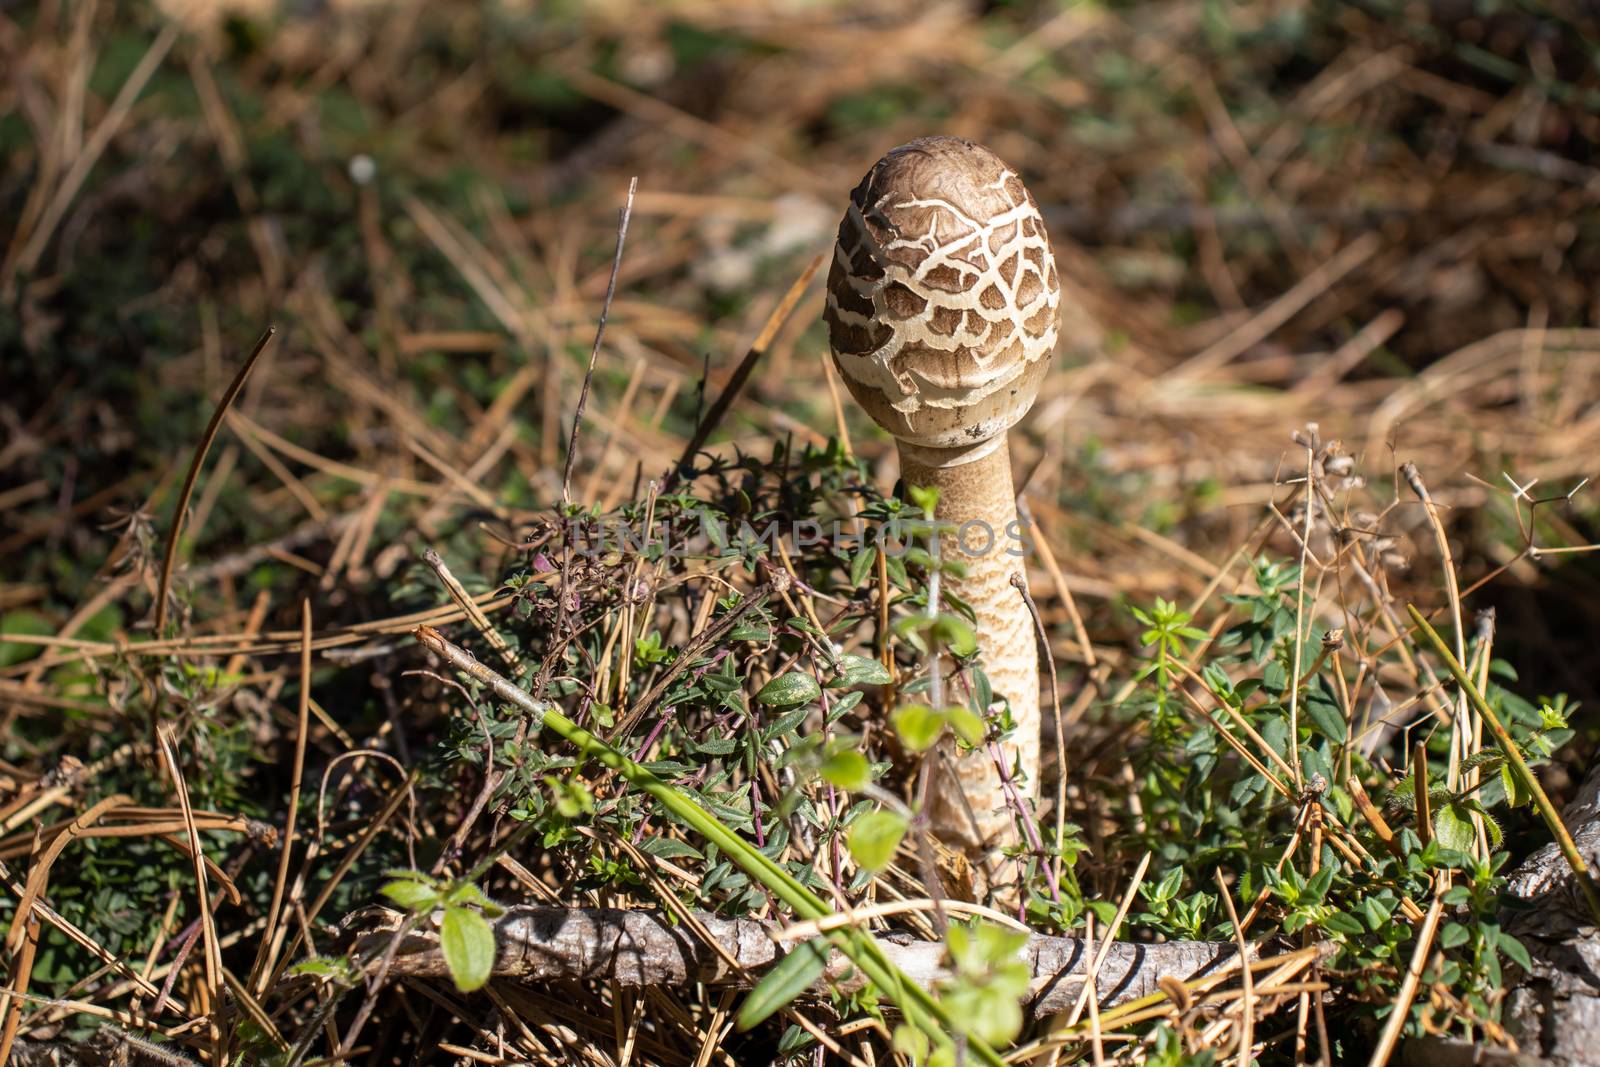 parasol mushroom on the ground in the forest close up Macrolepiota procera by Andreajk3